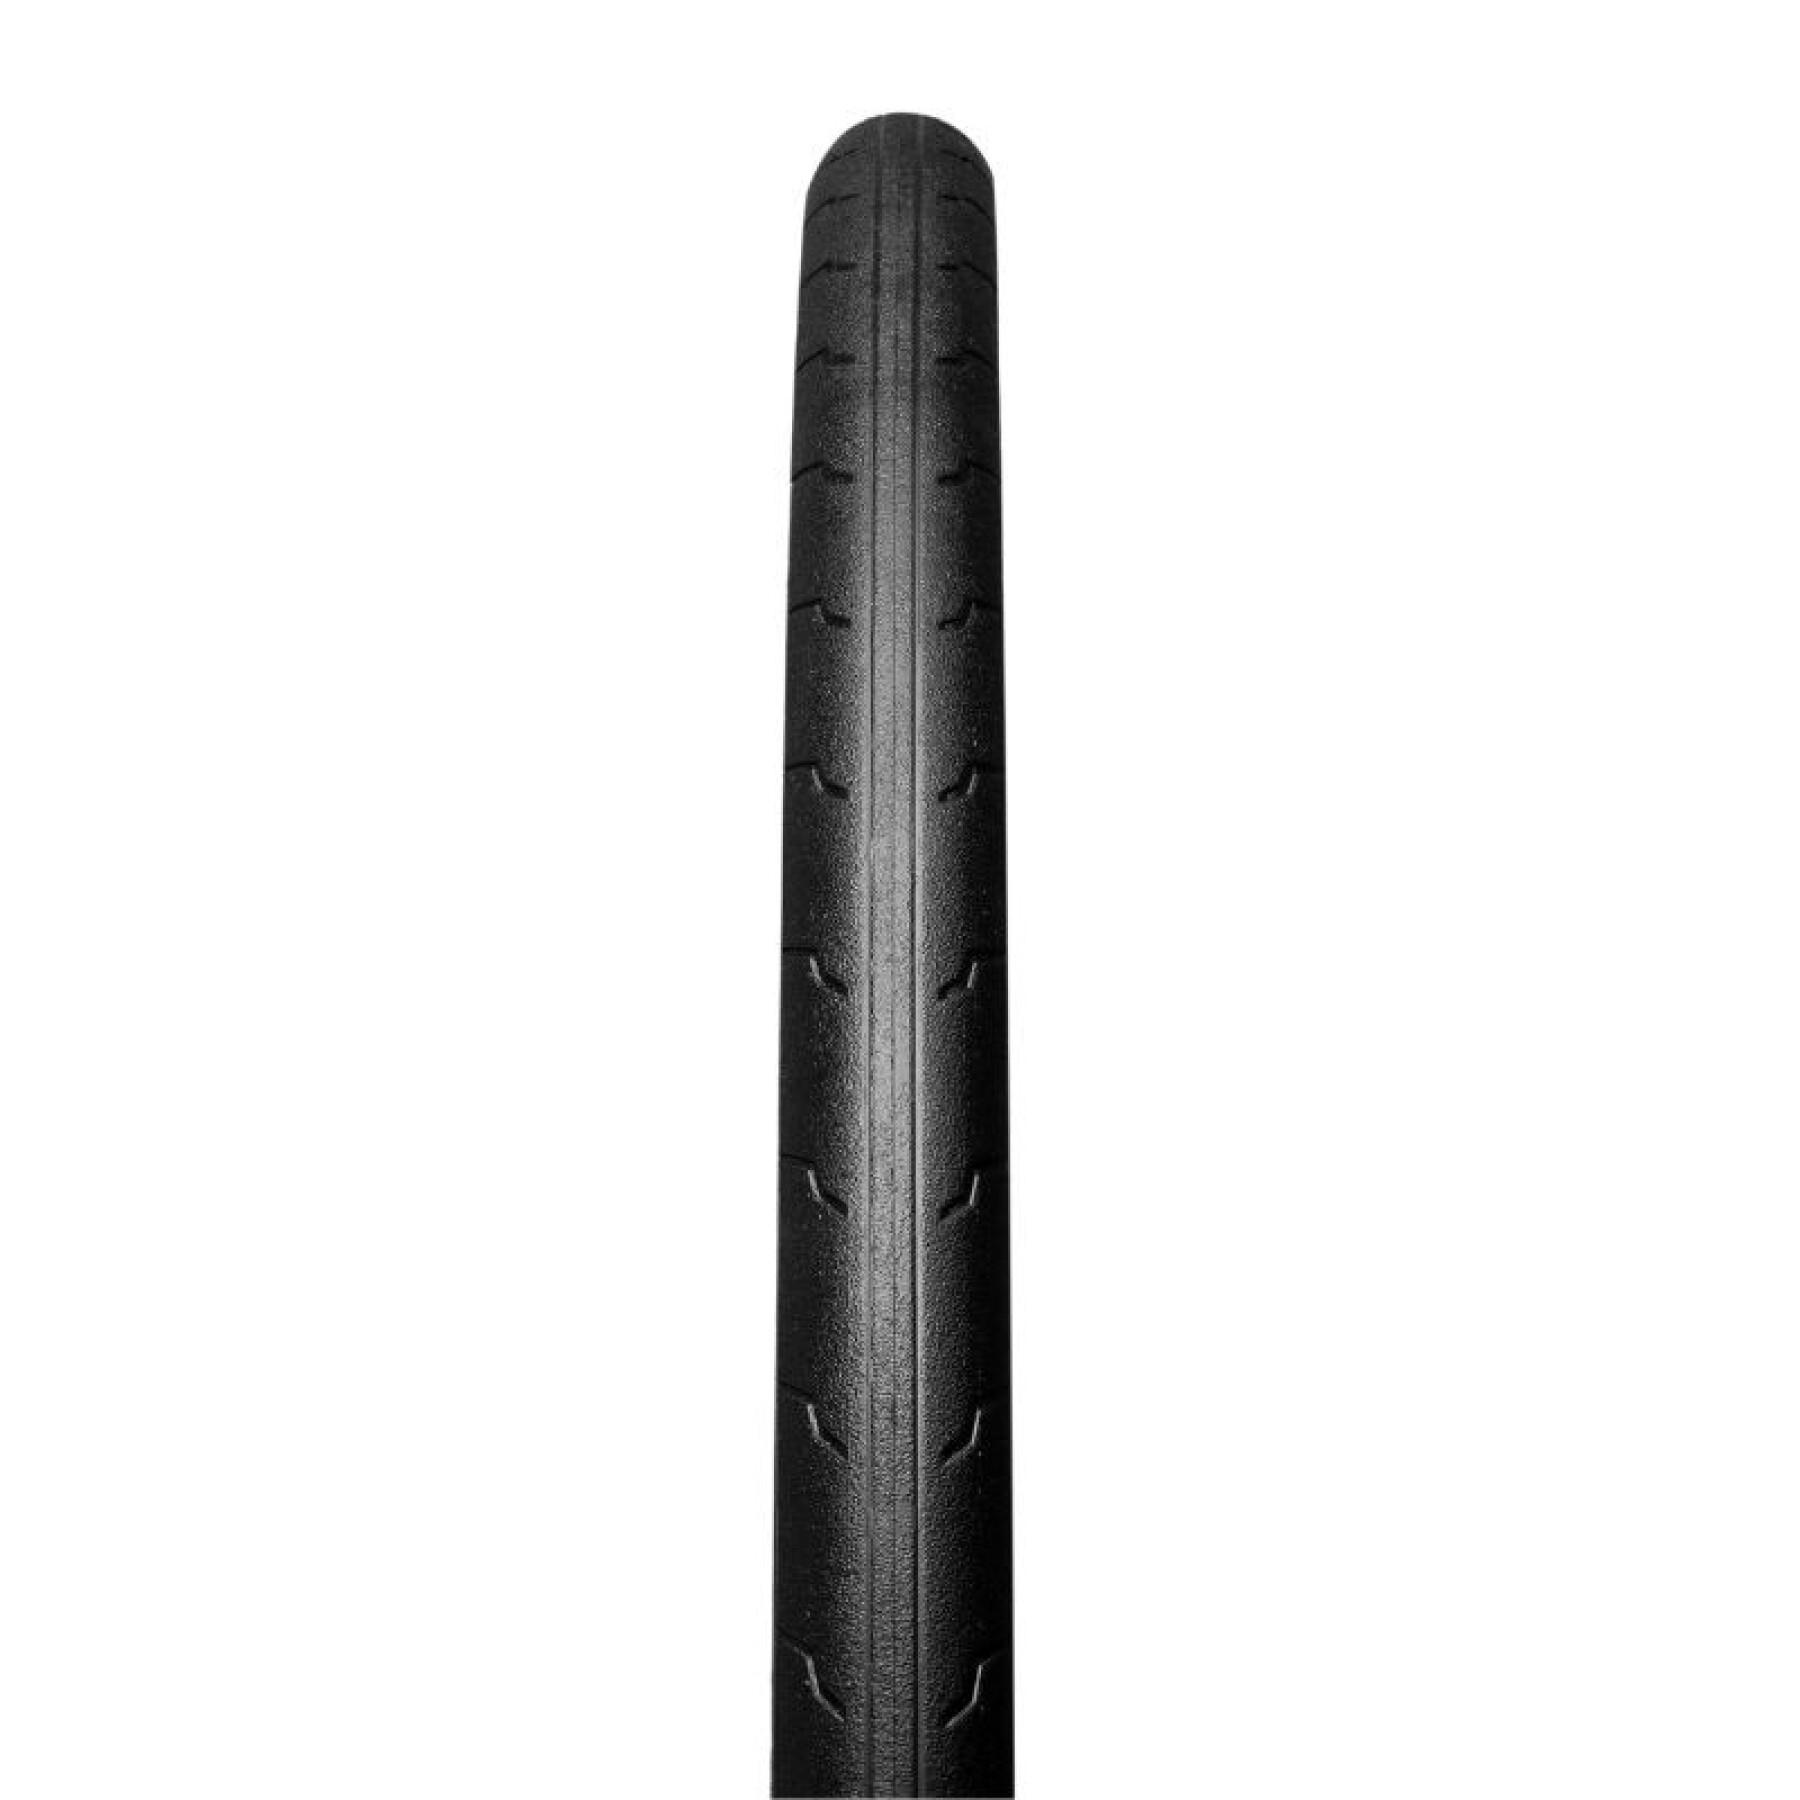 Road tire reinforces Hutchinson Challenger Ts (30-622)